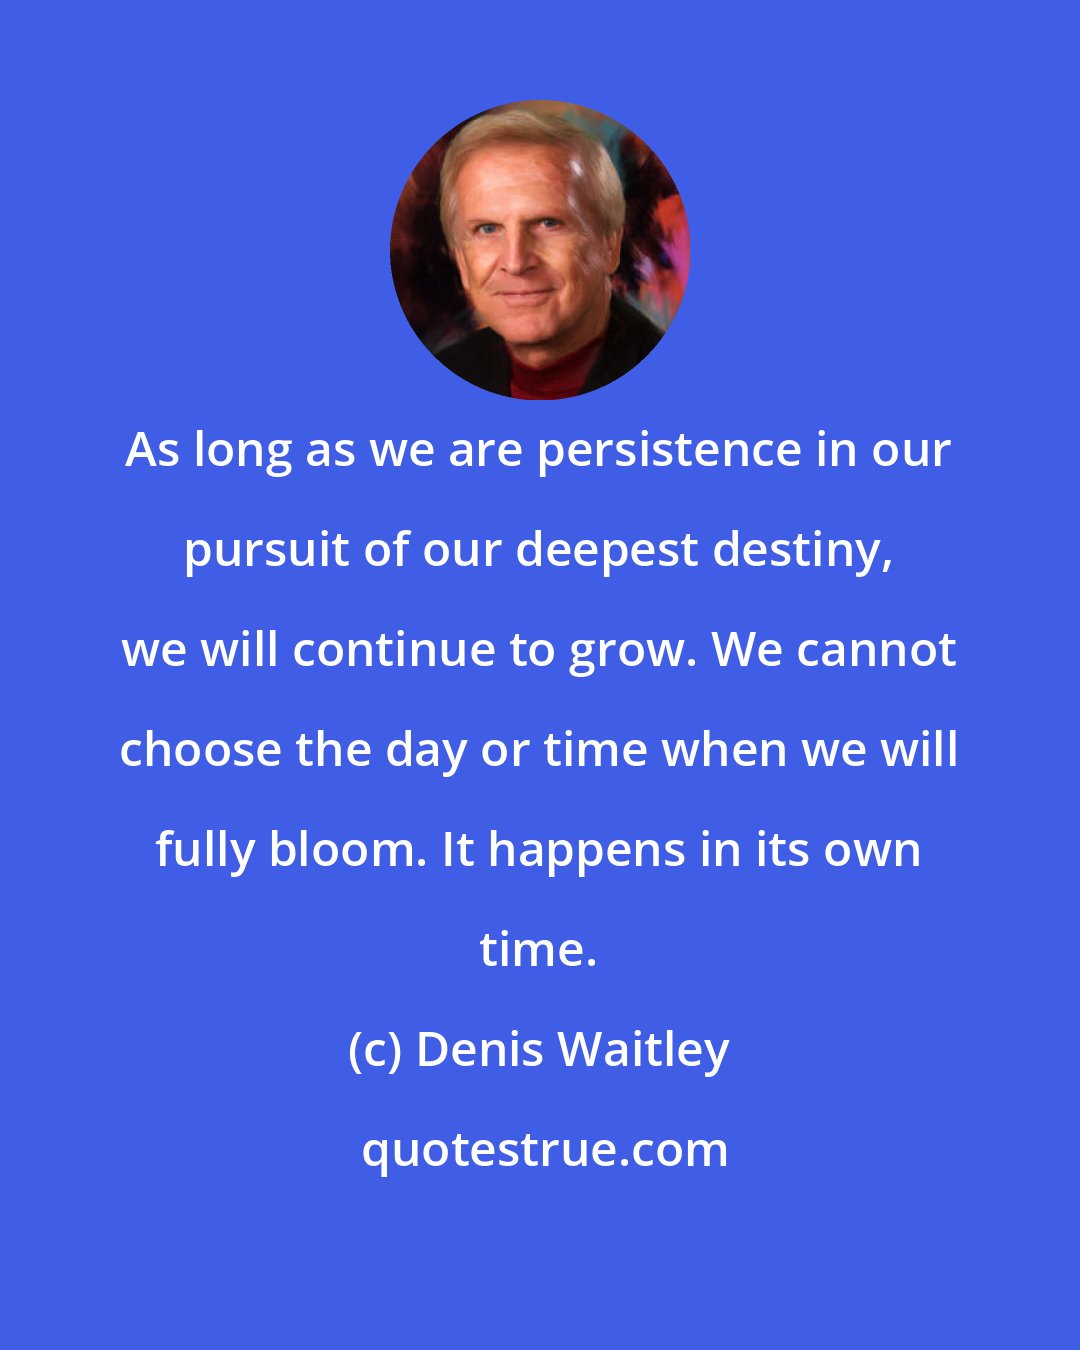 Denis Waitley: As long as we are persistence in our pursuit of our deepest destiny, we will continue to grow. We cannot choose the day or time when we will fully bloom. It happens in its own time.